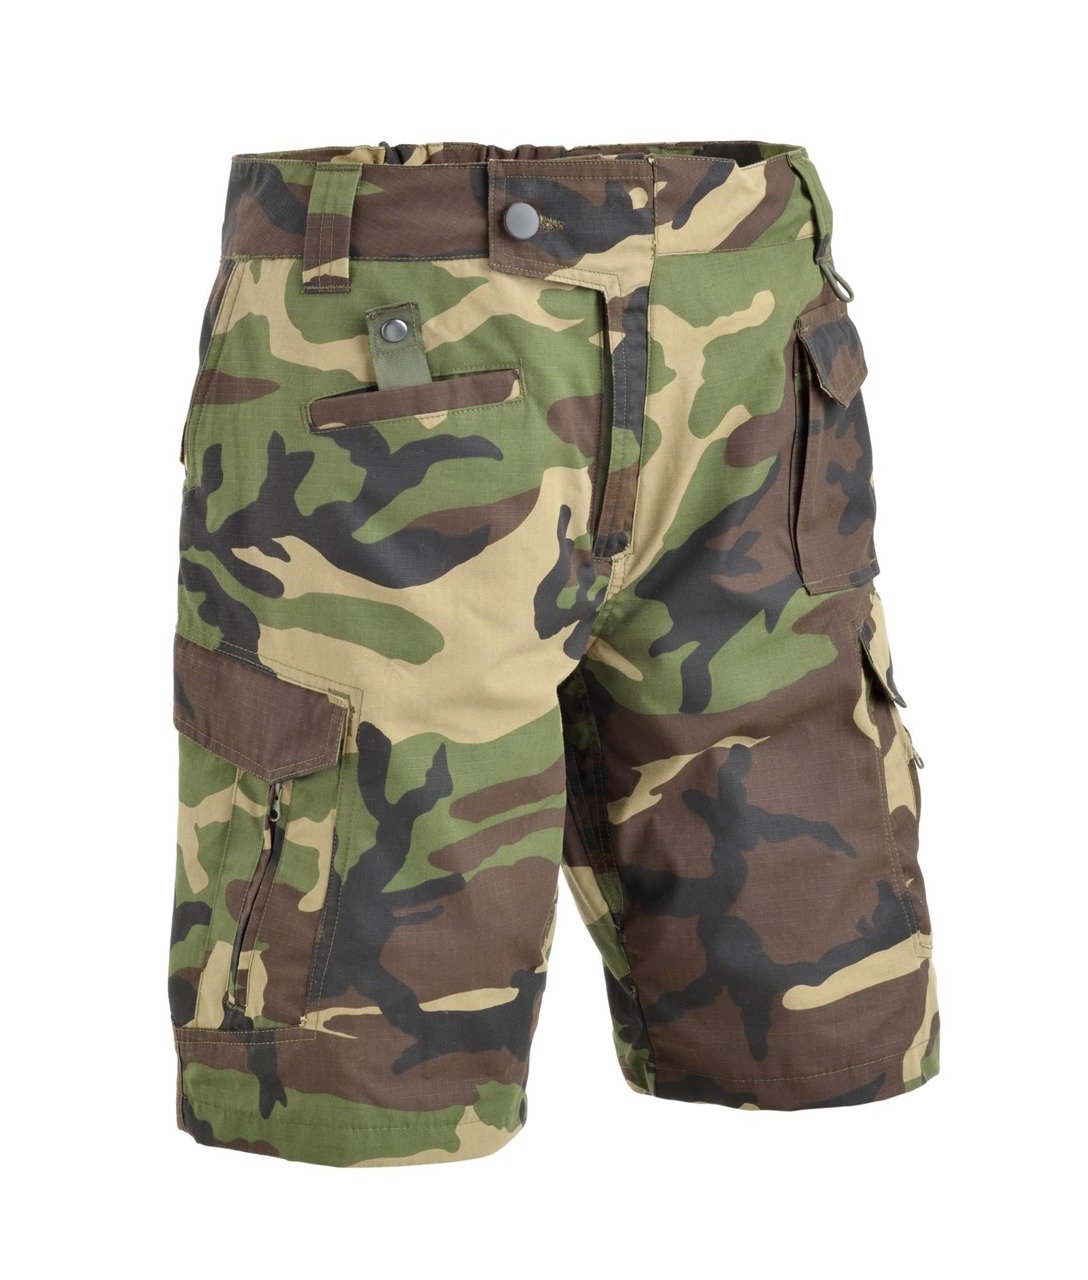 Women's Woodland Camo Booty Camp Shorts & Top – The Surplus Guy